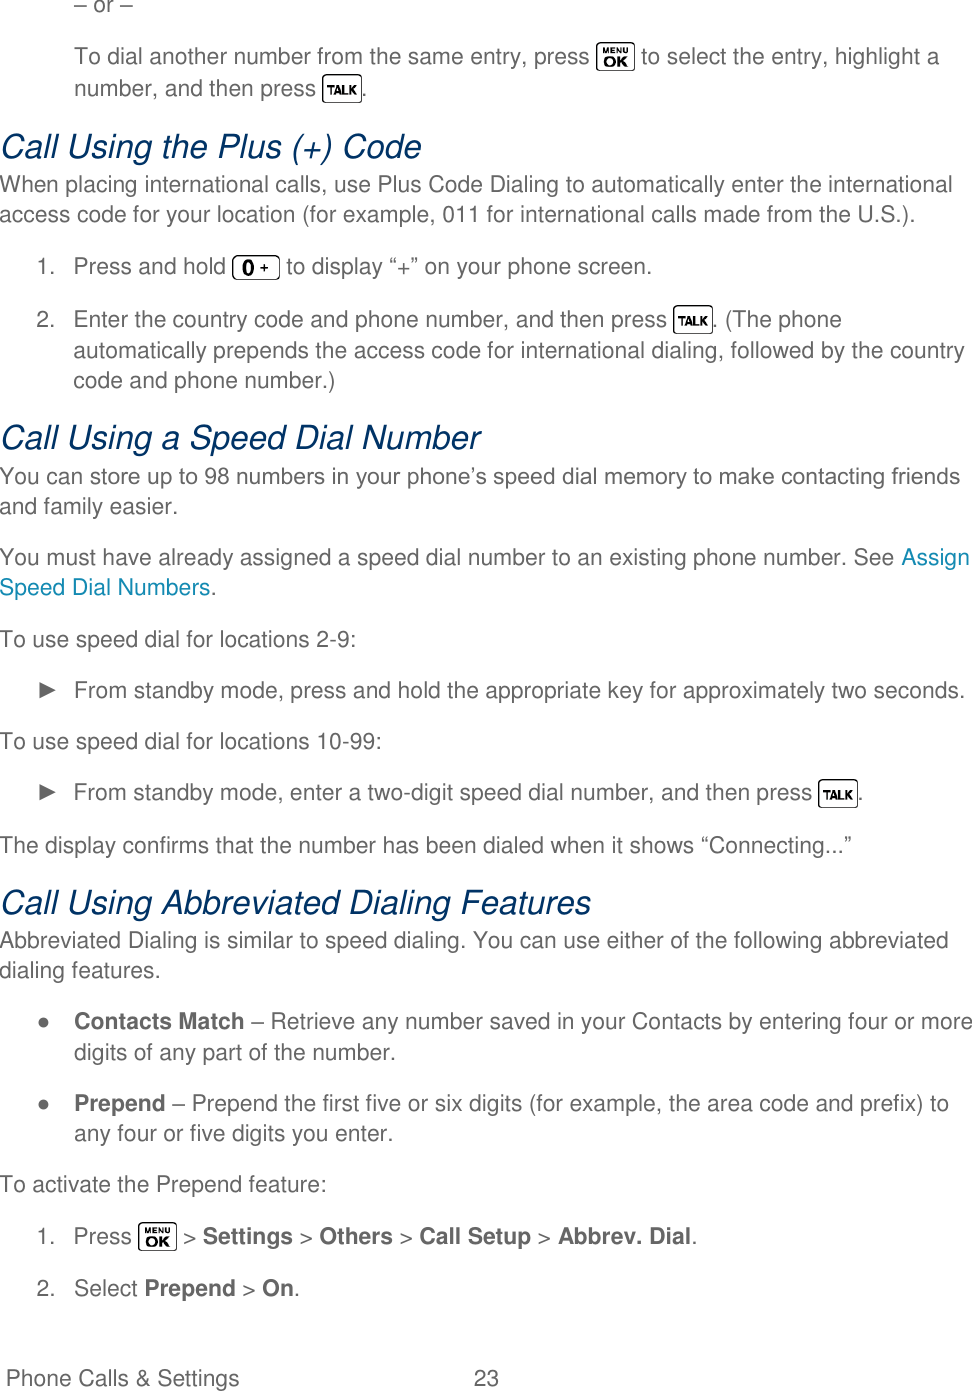   Phone Calls &amp; Settings  23   – or – To dial another number from the same entry, press   to select the entry, highlight a number, and then press  . Call Using the Plus (+) Code When placing international calls, use Plus Code Dialing to automatically enter the international access code for your location (for example, 011 for international calls made from the U.S.). 1.  Press and hold   to display ―+‖ on your phone screen. 2.  Enter the country code and phone number, and then press  . (The phone automatically prepends the access code for international dialing, followed by the country code and phone number.) Call Using a Speed Dial Number You can store up to 98 numbers in your phone‘s speed dial memory to make contacting friends and family easier. You must have already assigned a speed dial number to an existing phone number. See Assign Speed Dial Numbers. To use speed dial for locations 2-9: ►  From standby mode, press and hold the appropriate key for approximately two seconds. To use speed dial for locations 10-99: ►  From standby mode, enter a two-digit speed dial number, and then press  . The display confirms that the number has been dialed when it shows ―Connecting...‖ Call Using Abbreviated Dialing Features Abbreviated Dialing is similar to speed dialing. You can use either of the following abbreviated dialing features. ● Contacts Match – Retrieve any number saved in your Contacts by entering four or more digits of any part of the number. ● Prepend – Prepend the first five or six digits (for example, the area code and prefix) to any four or five digits you enter. To activate the Prepend feature: 1.  Press   &gt; Settings &gt; Others &gt; Call Setup &gt; Abbrev. Dial. 2.  Select Prepend &gt; On. 